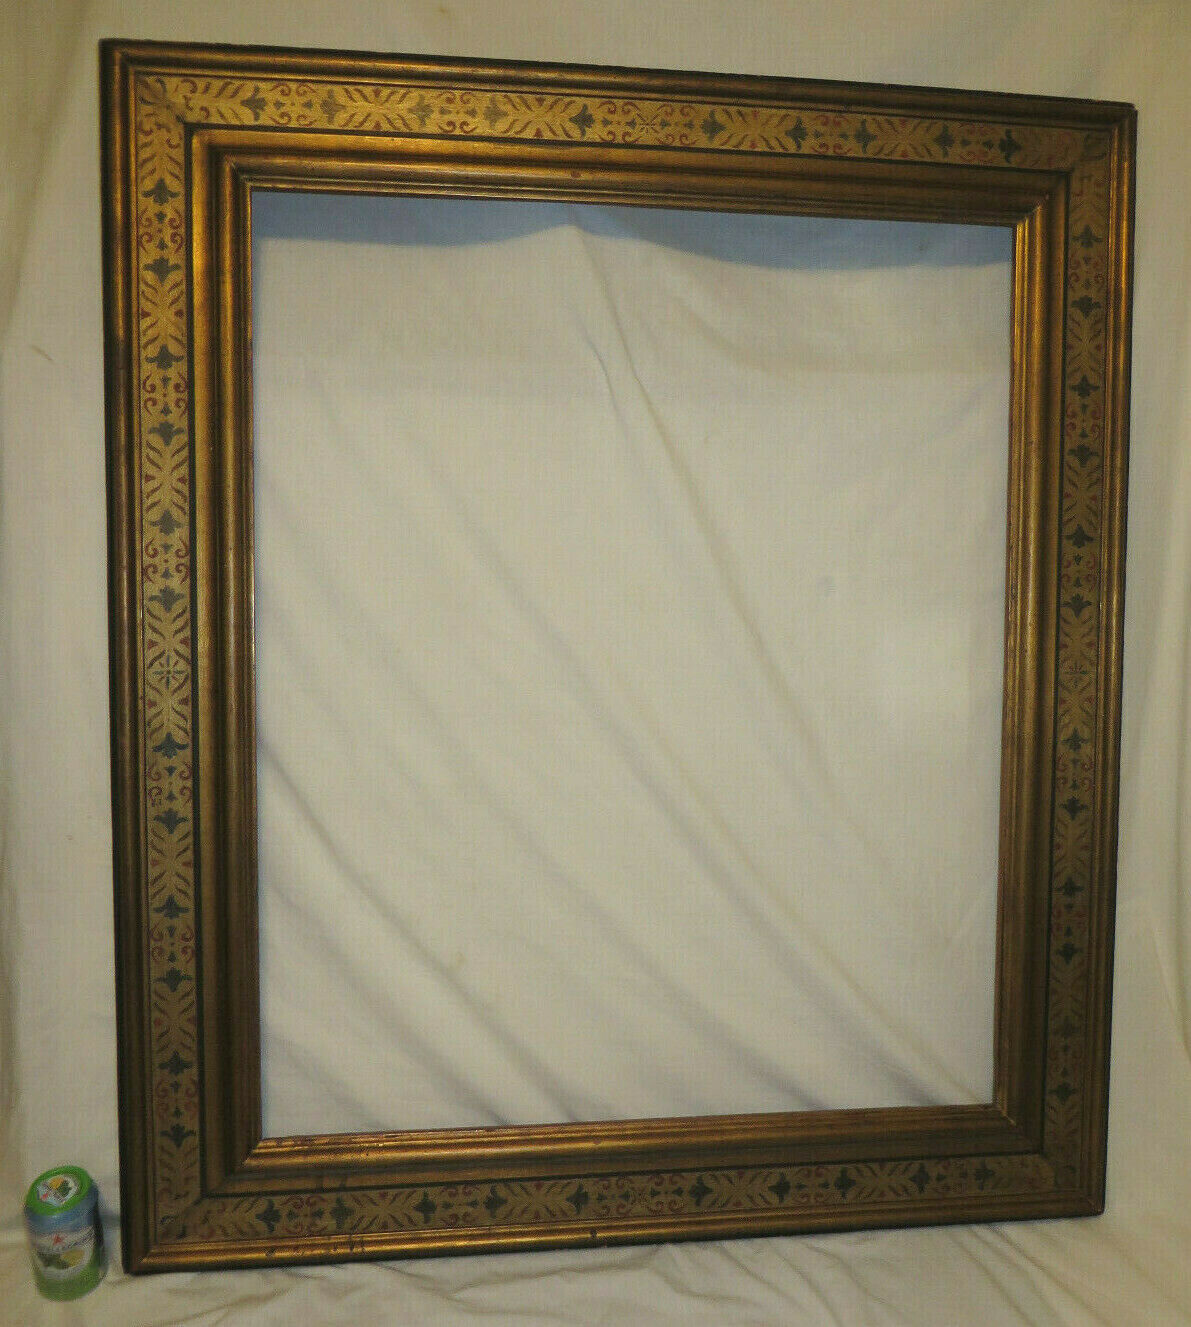 c.1920’s Newcomb Macklin Arts & Crafts Decorated Gilded Frame Fits 30x36